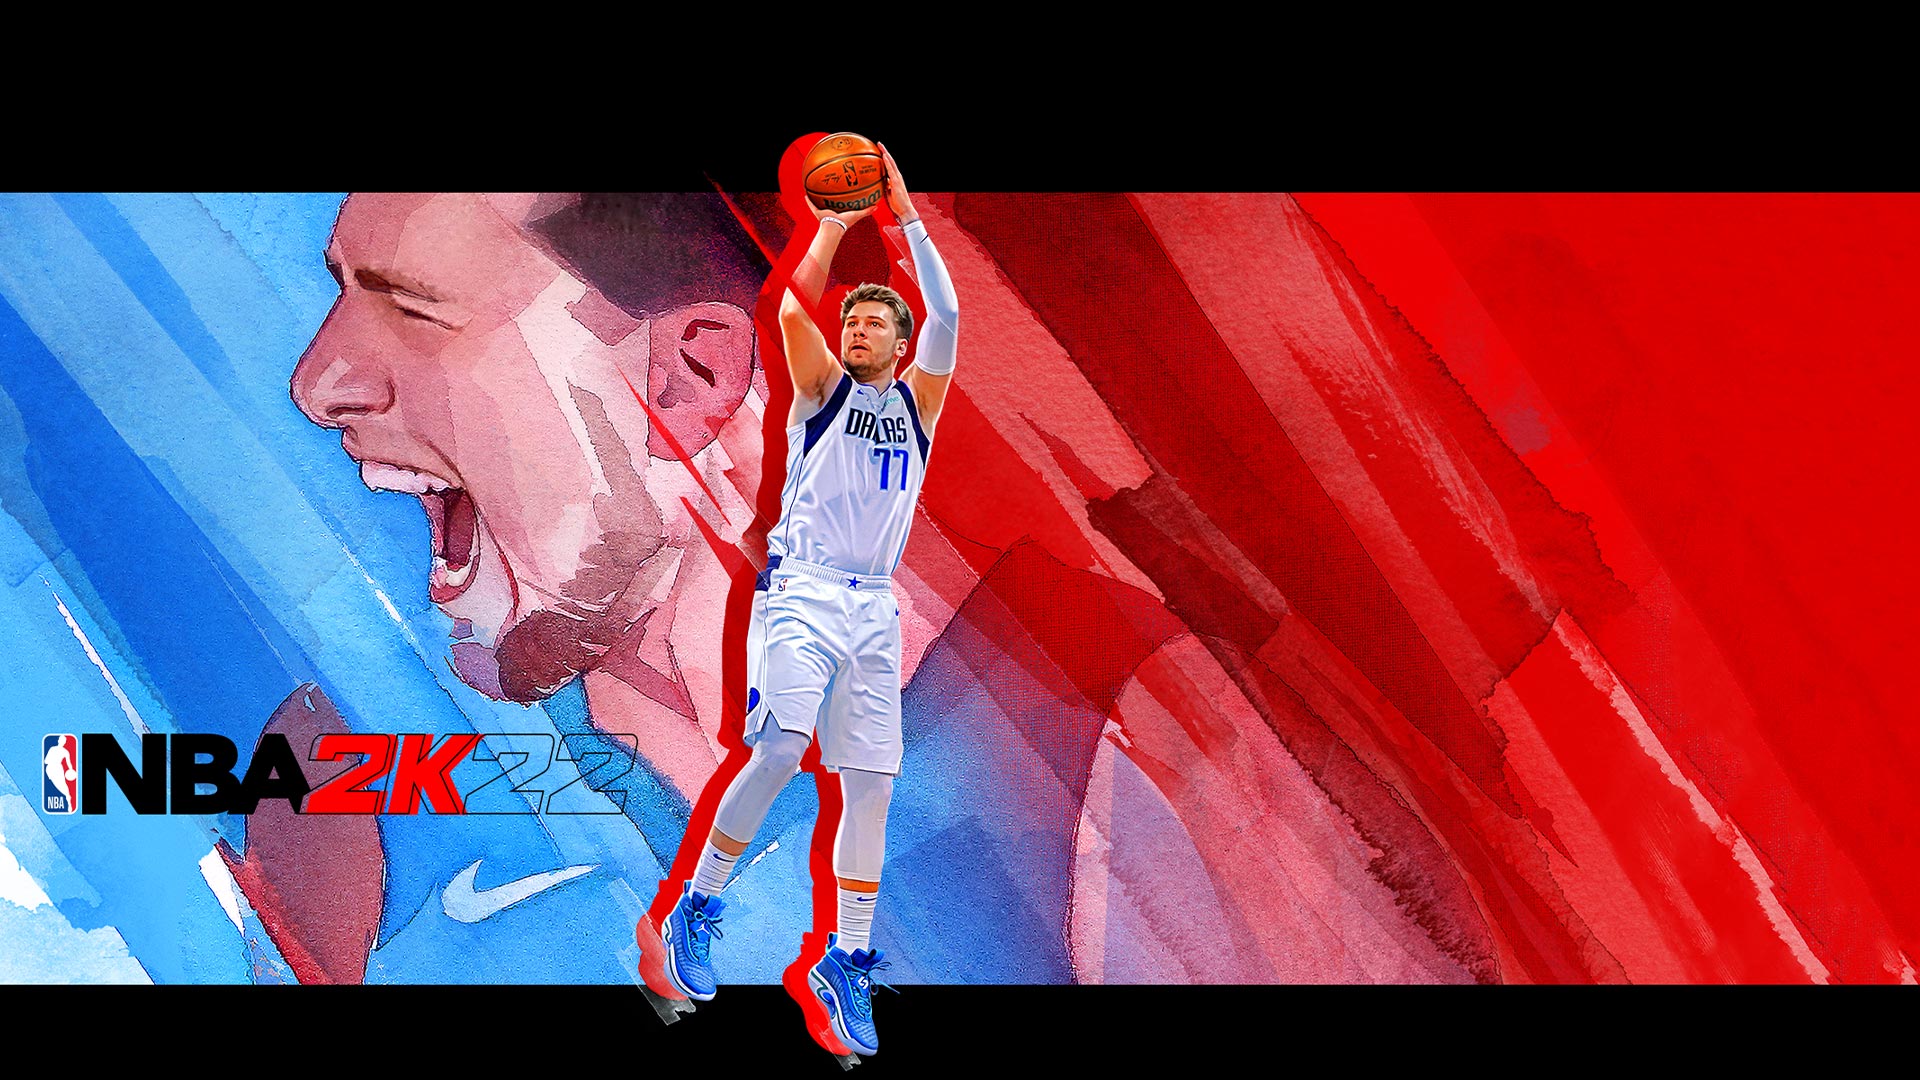 Poster of a player throwing a ball